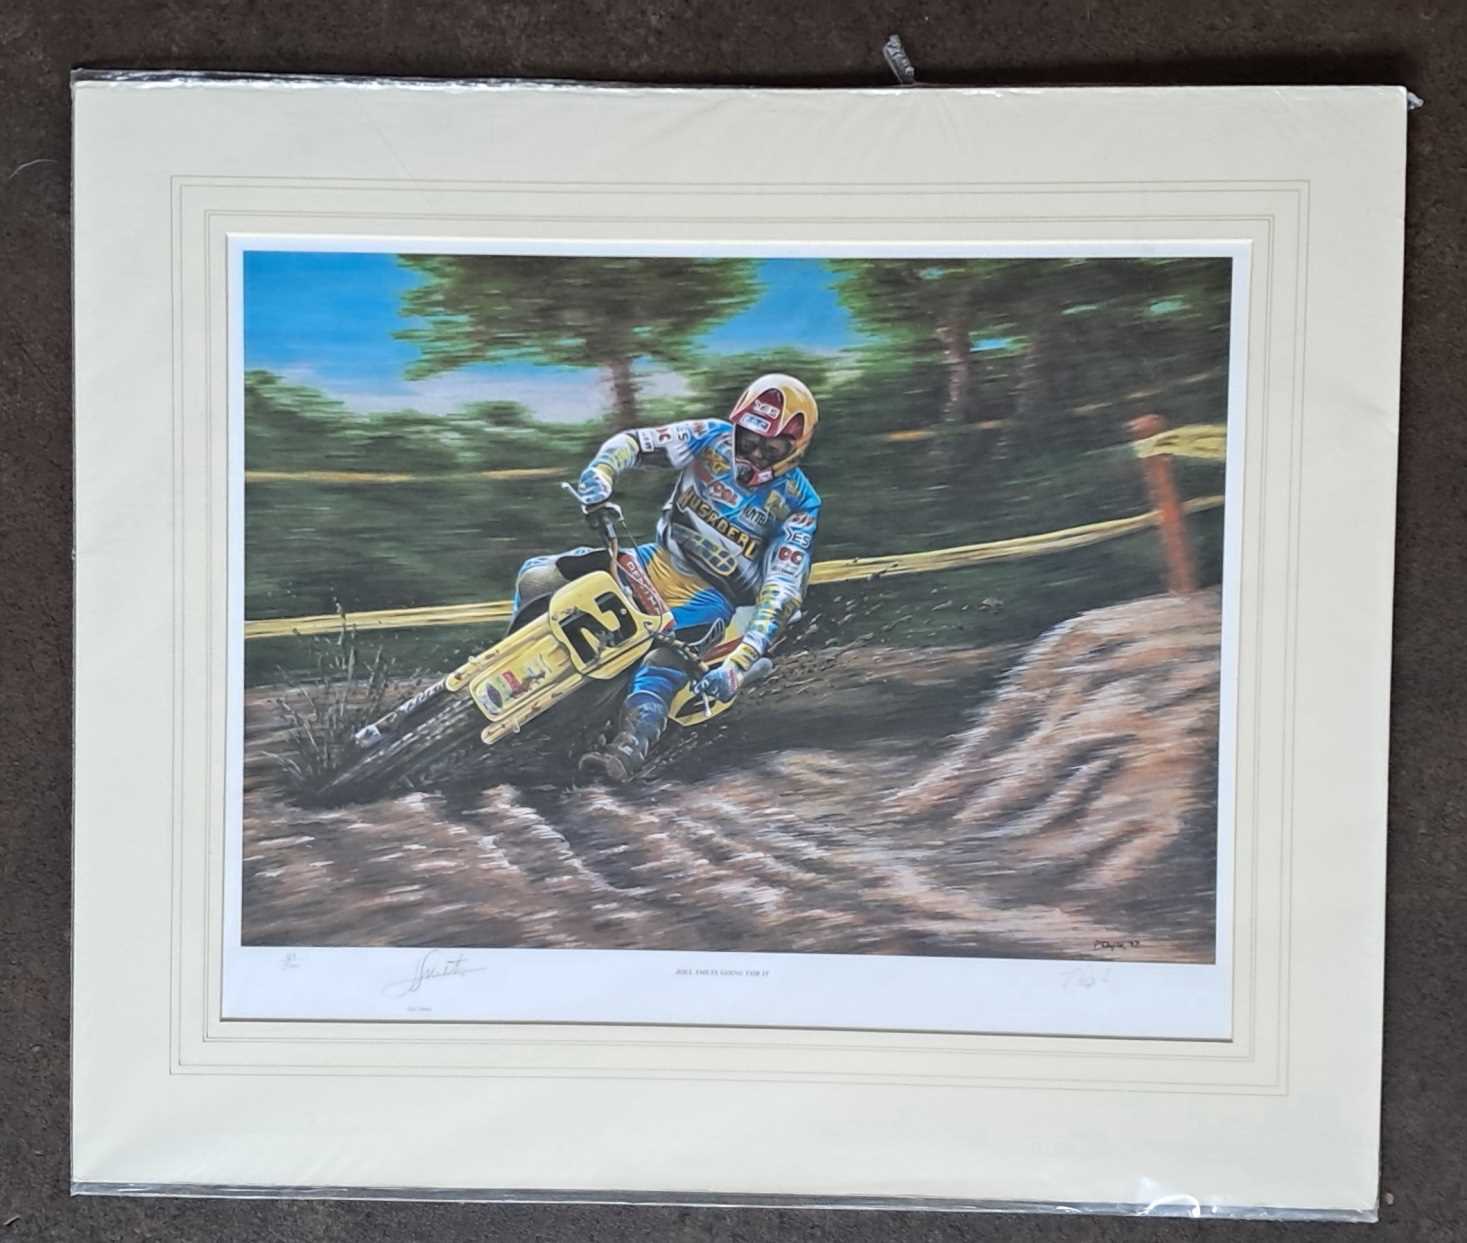 PAUL DOYLE - JOEL SMETS GOING FOR IT SIGNED BY JOEL SMETS. 67/500. 600 x 710 mm.